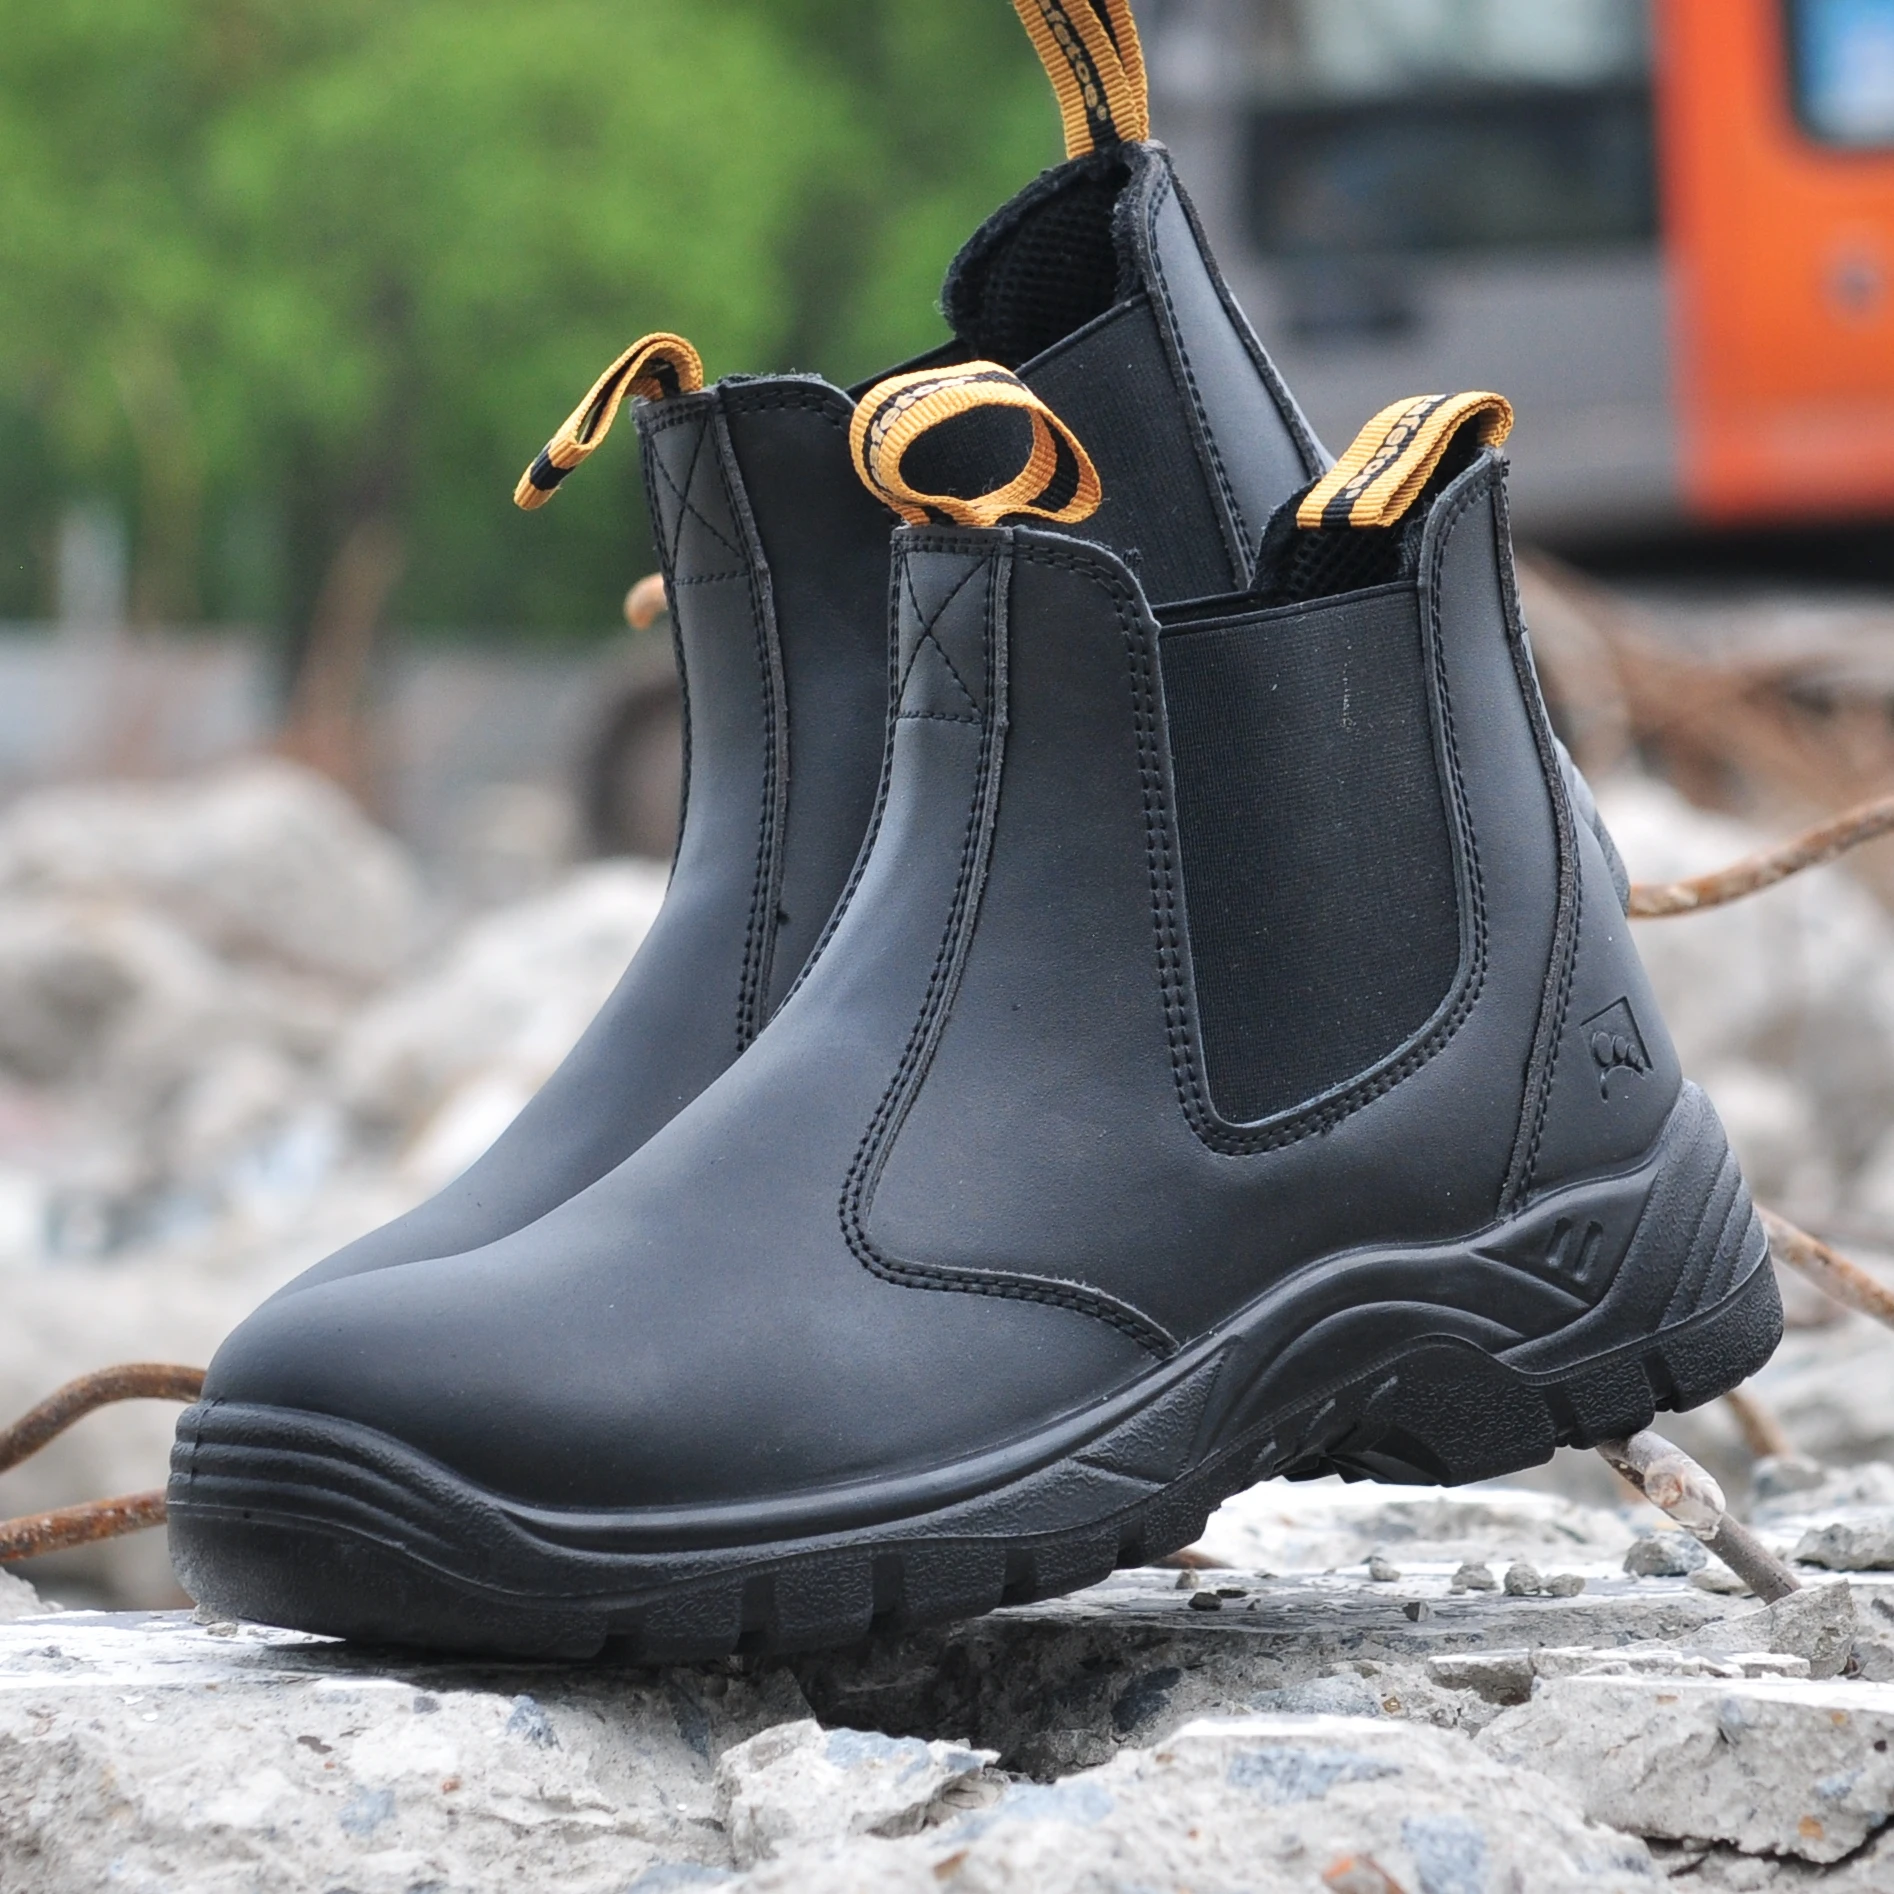 New Safetoe Safety Shoes Mens Leather Work Boots Steel Toe Water Foot Protection 